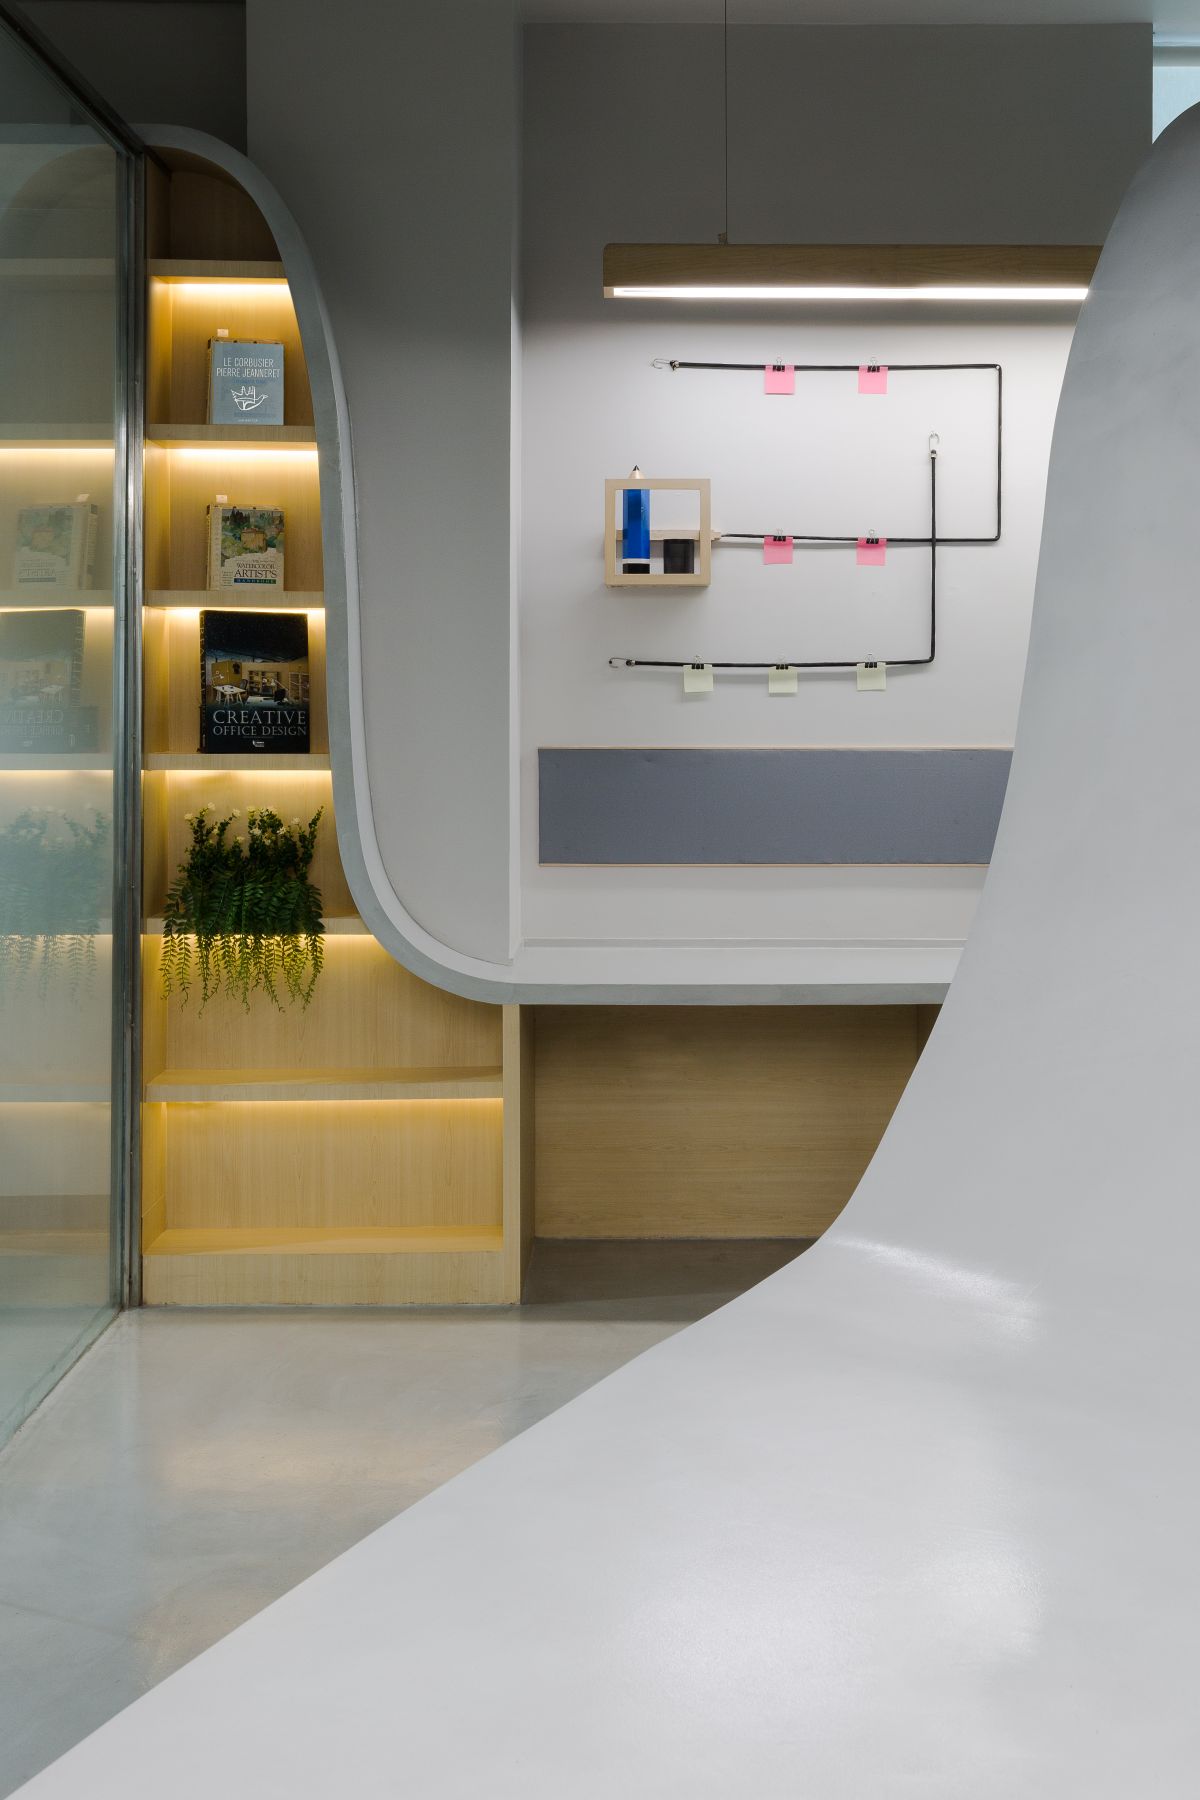 The Spatial Stimuli - An Architect's Office, at New Delhi, by Creative Designer Architects 11